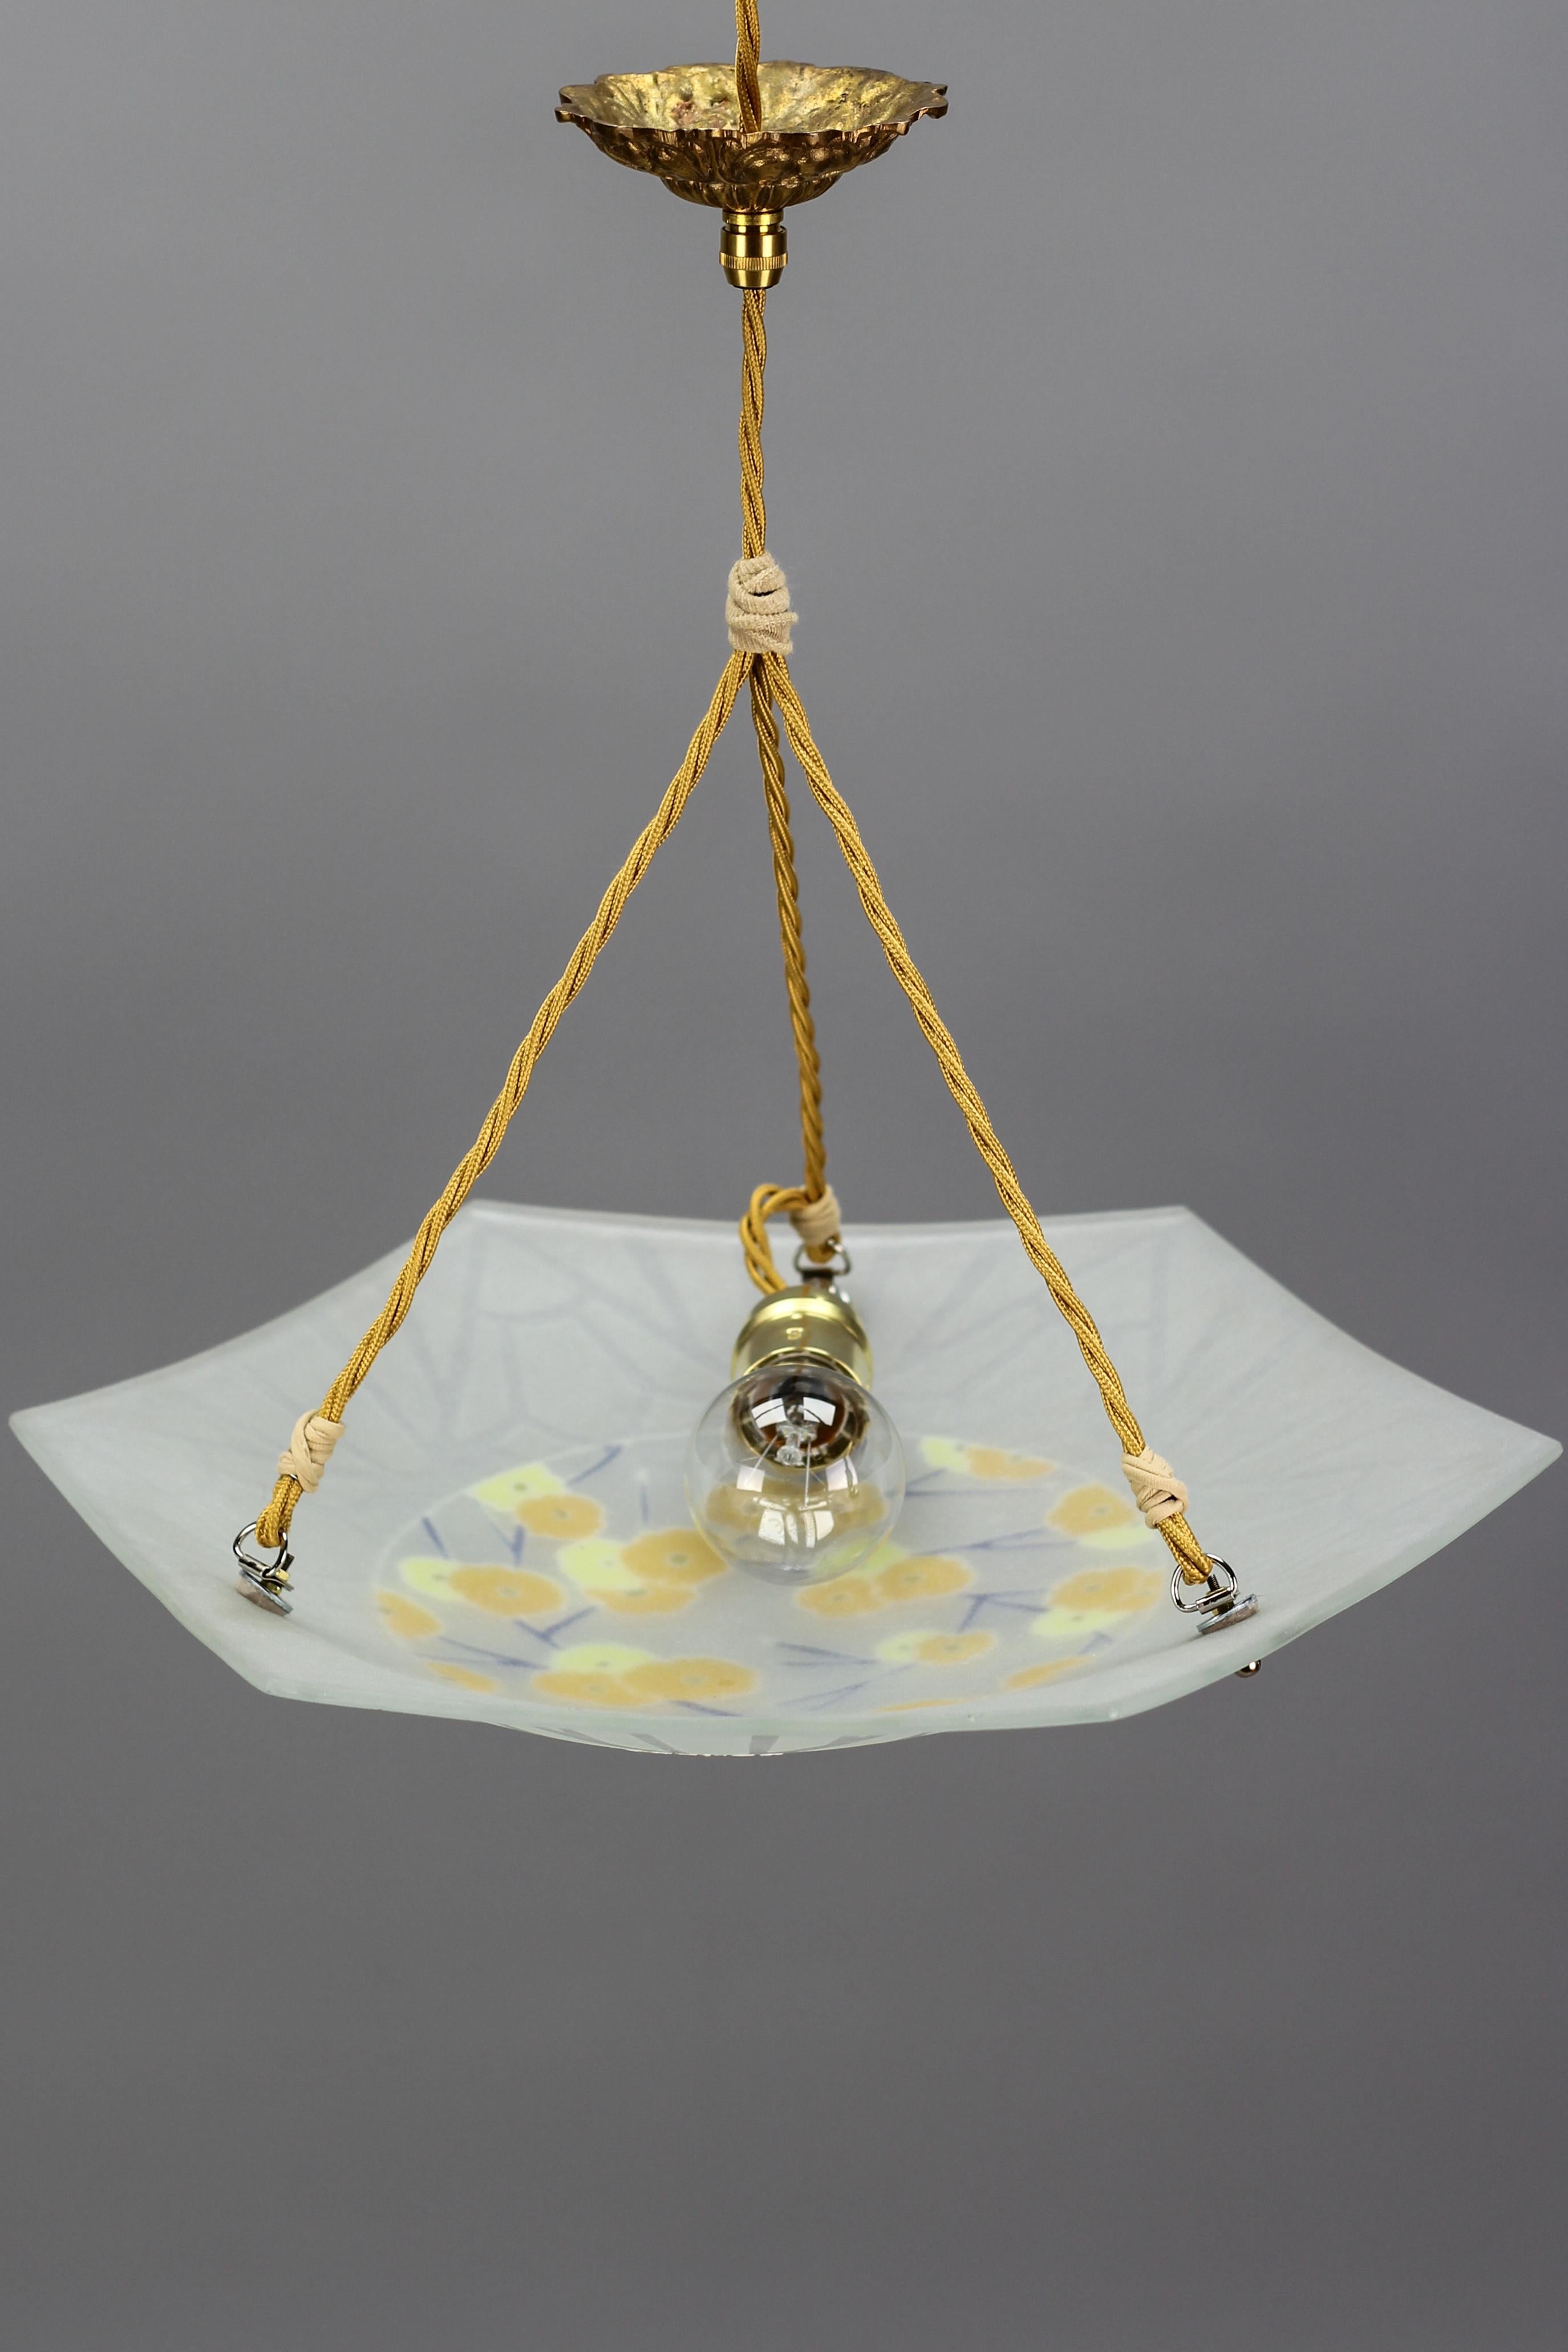 Art Deco Loys Lucha Signed Enameled and Frosted Glass Pendant Light, 1930s For Sale 5